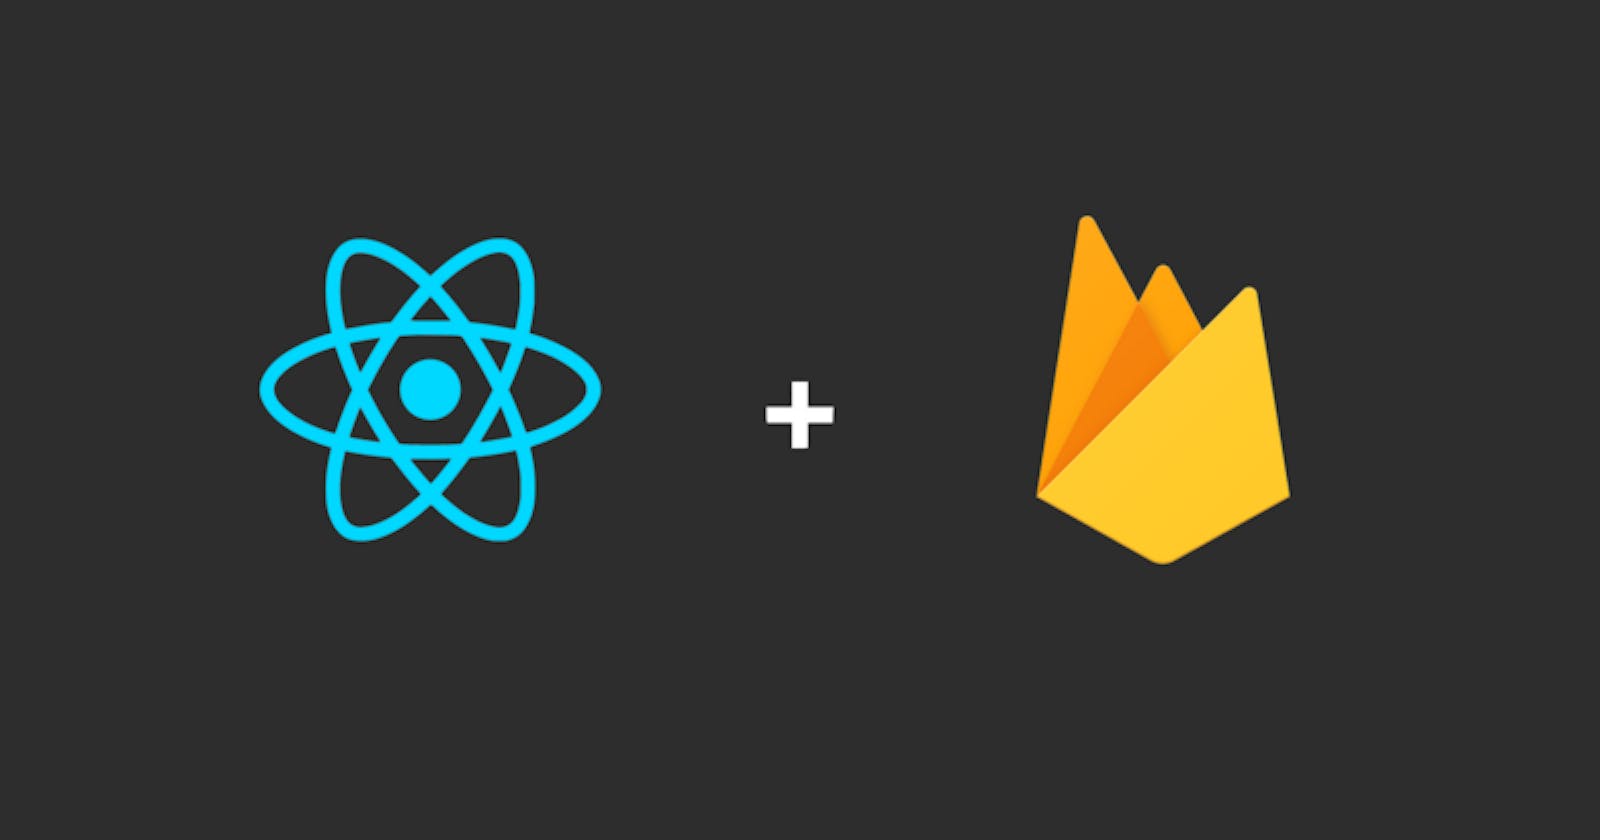 Building a serverless web application with React and Firebase